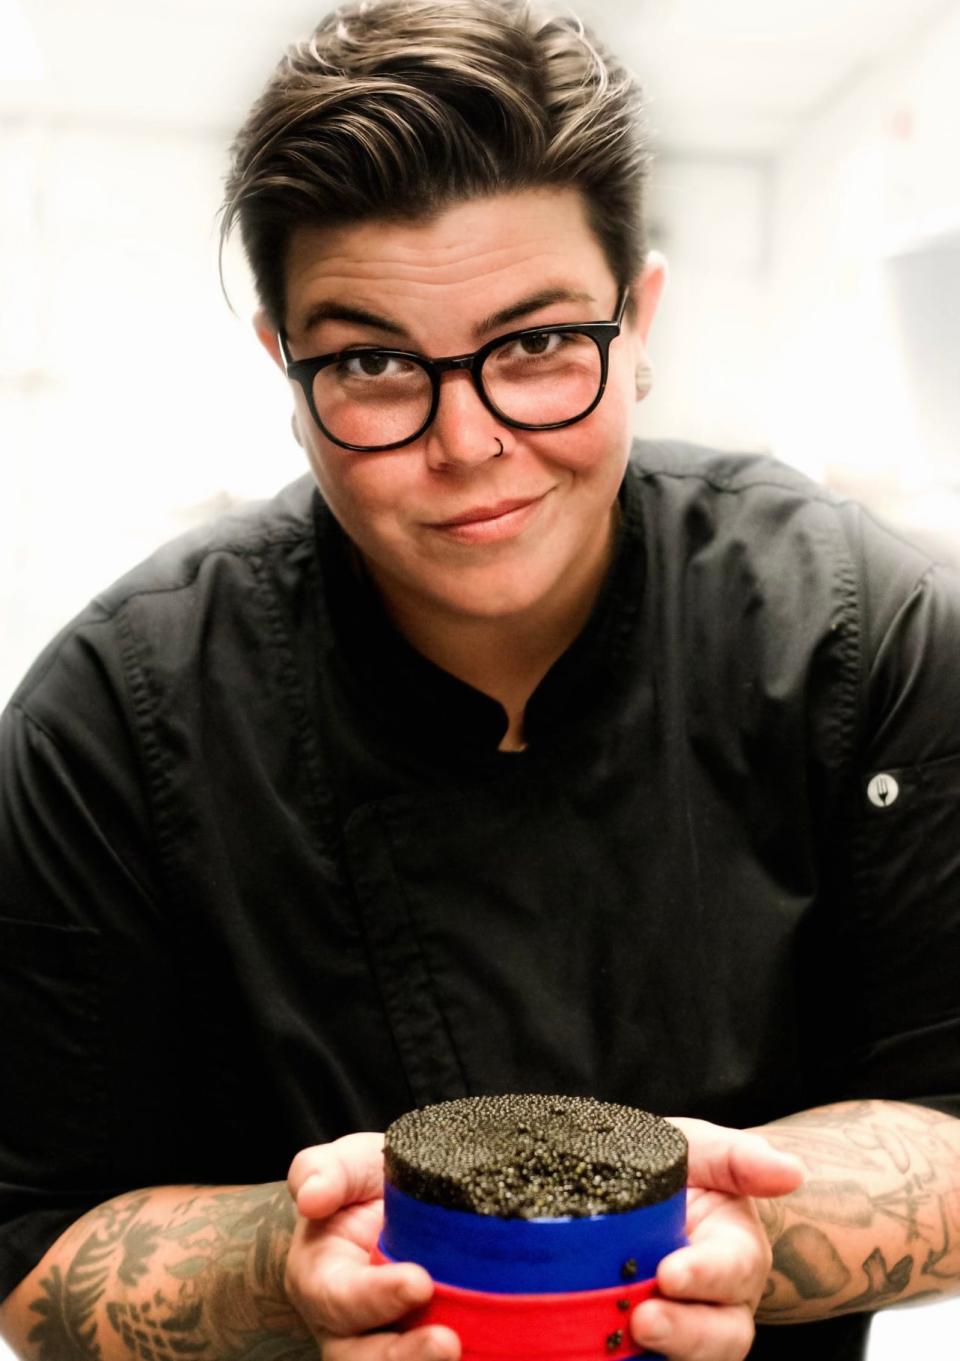 Celebrity Chef Britt Rescigno of New Gretna, known for her Food Network fame.